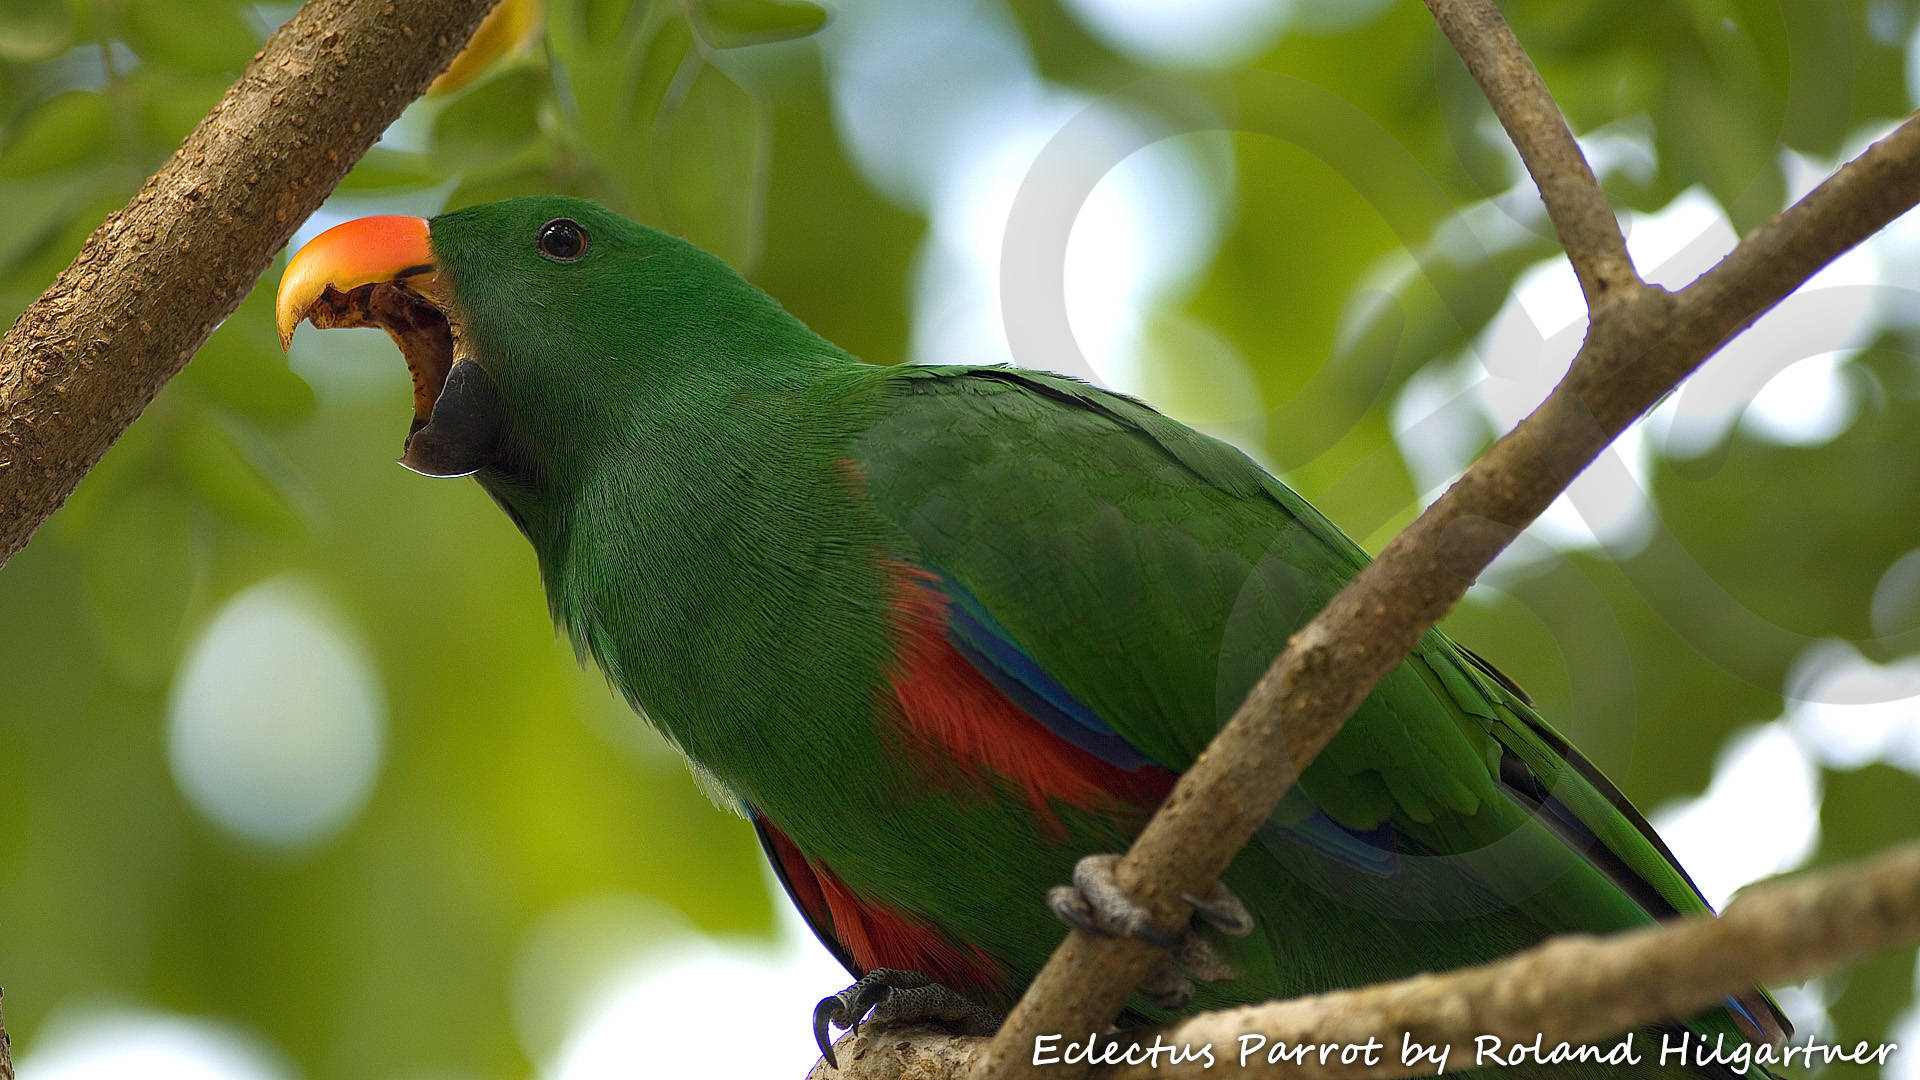 Eclectus Parrot Eclectus roratus is widely distributed throughout the lowland forests of the New Guinea region and beyond. Copyright © Roland Hilgartner